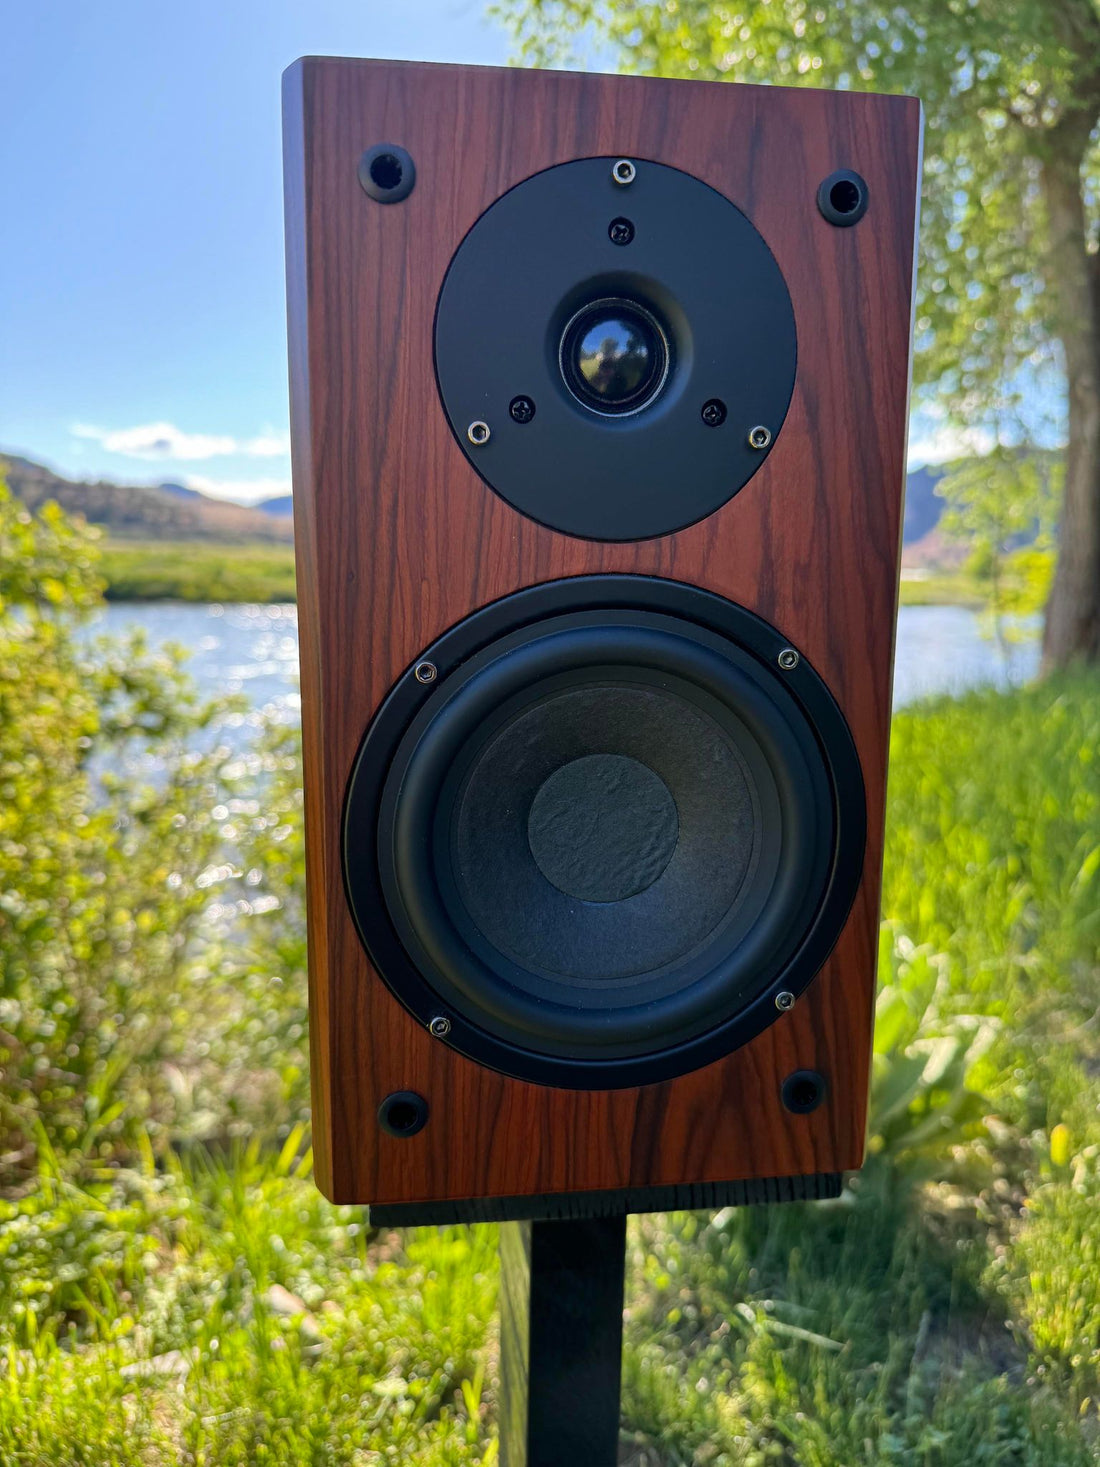 Vera-Fi Audio - Vanguard Scout speaker on stand out in nature 